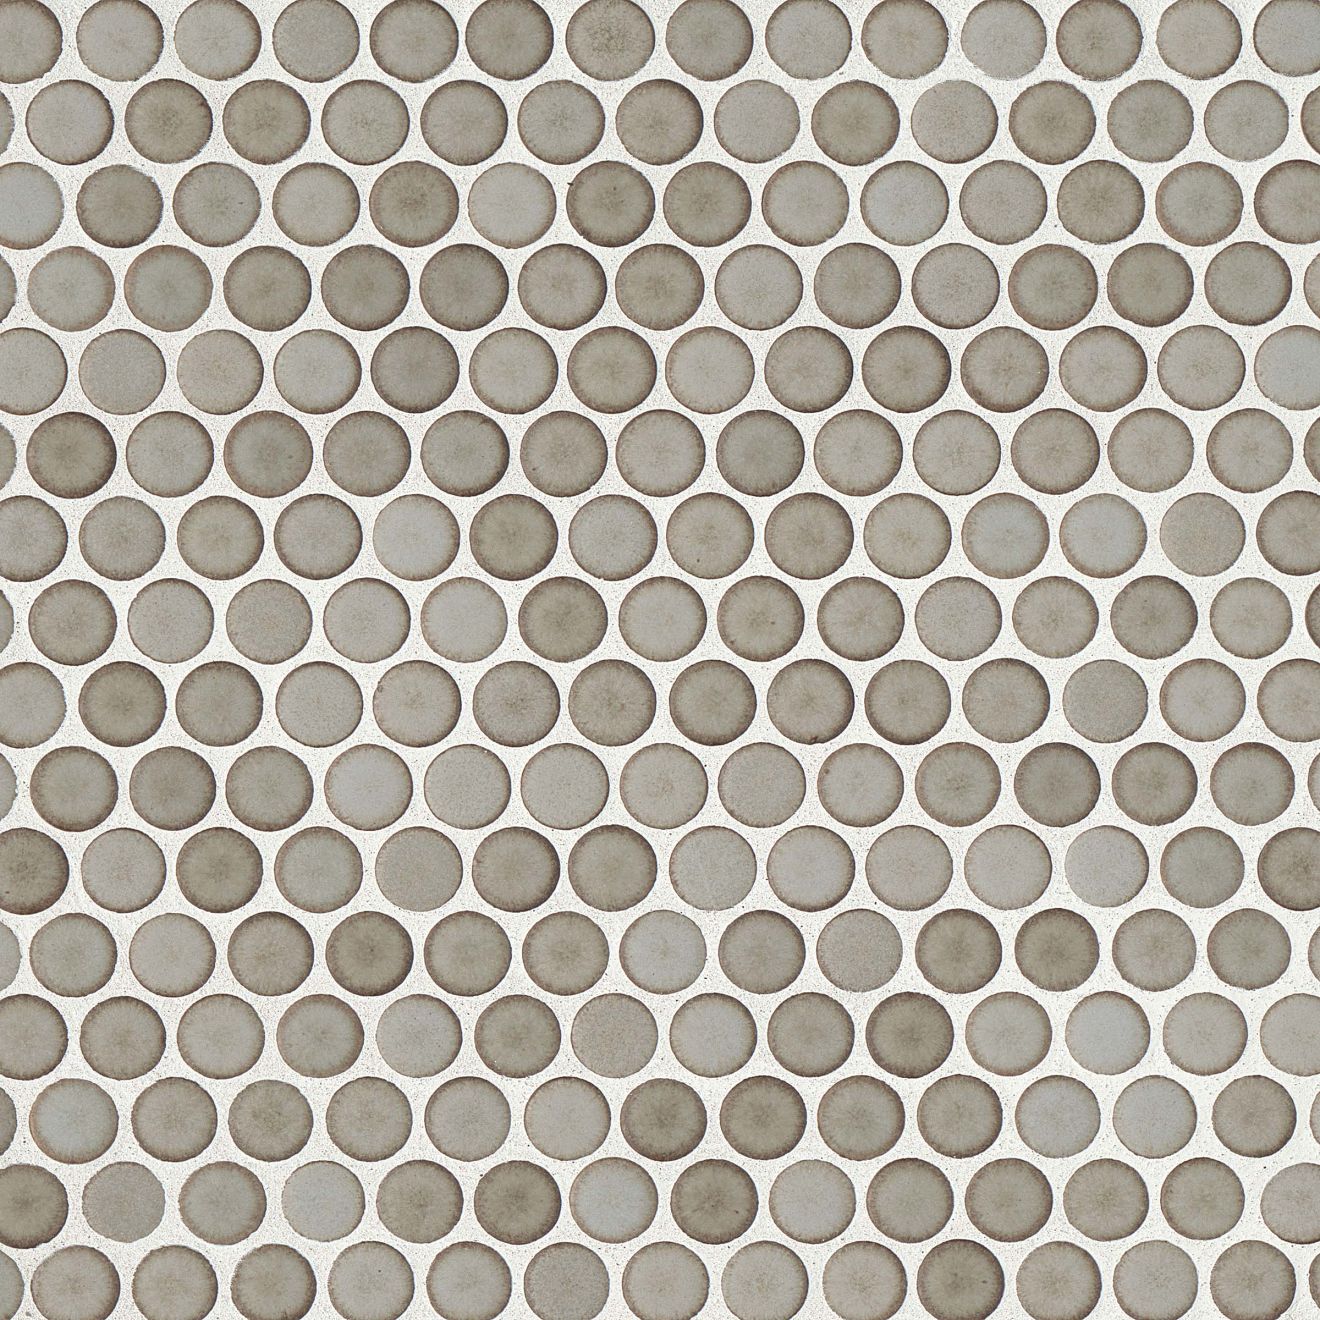 Pumice penny shaped mosaic tile on a beige background.